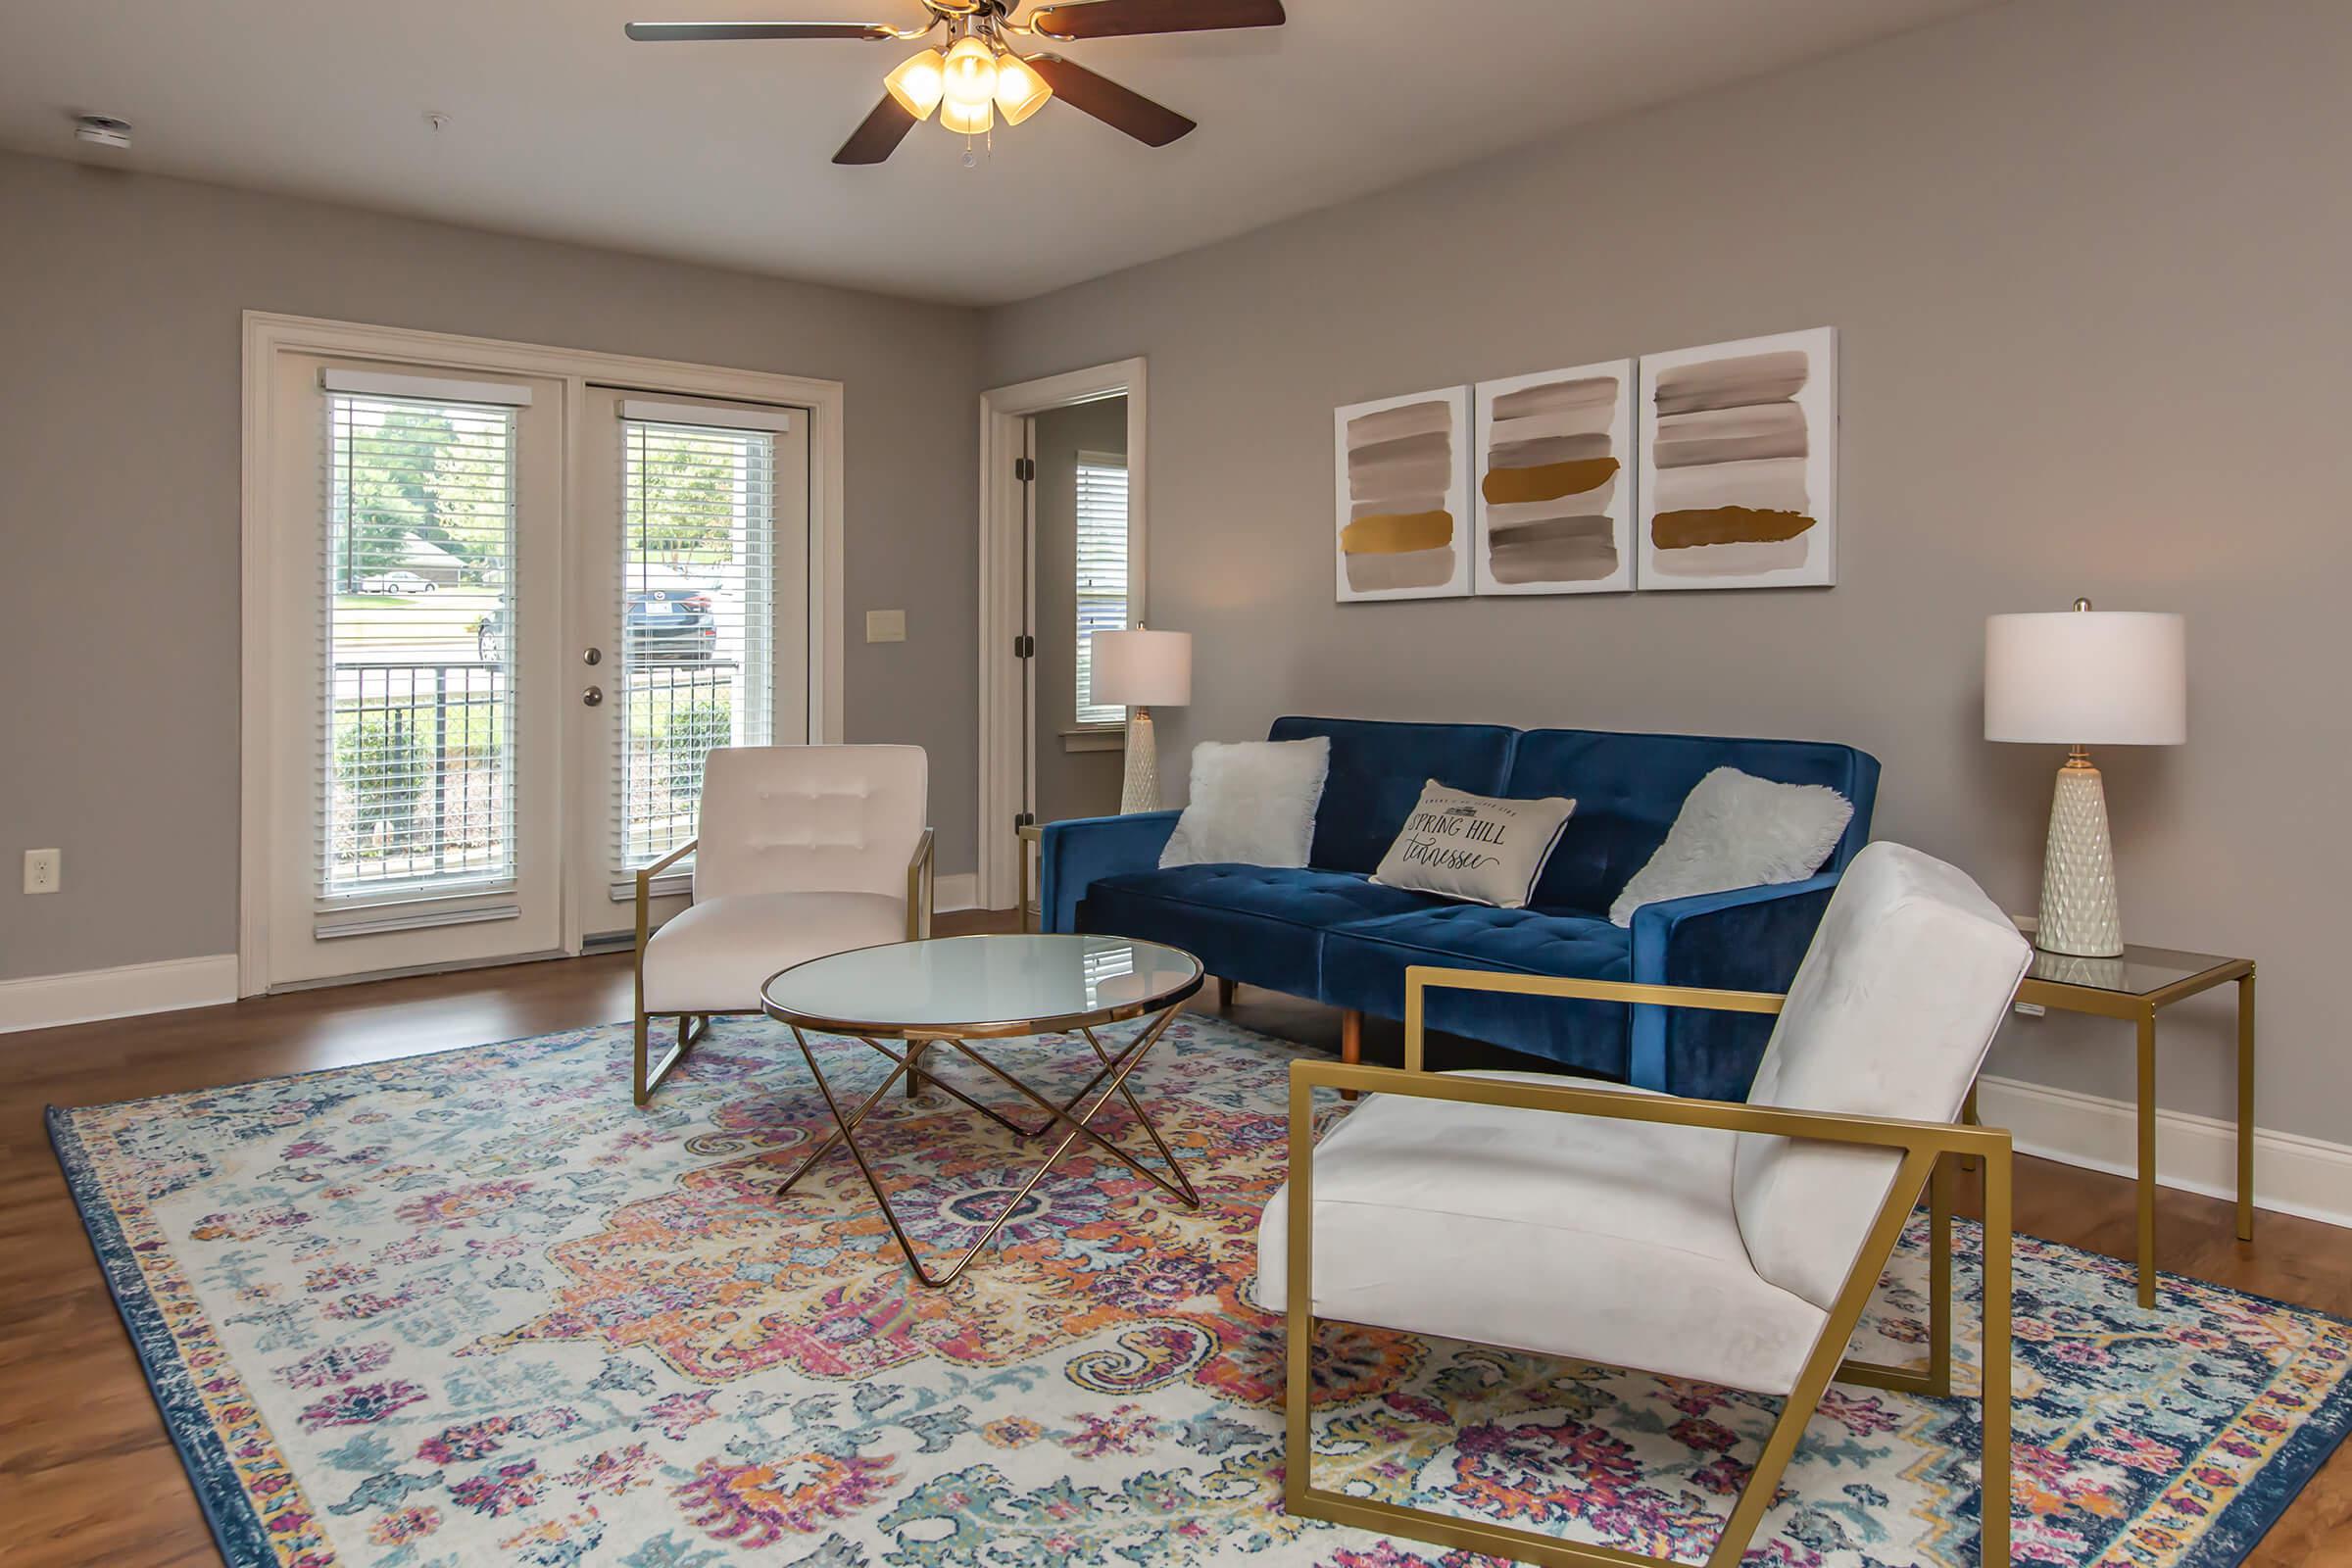 SUBSTANTIAL AND STYLISH LIVING ROOMS AT THE GRAND RESERVE AT SPRING HILL